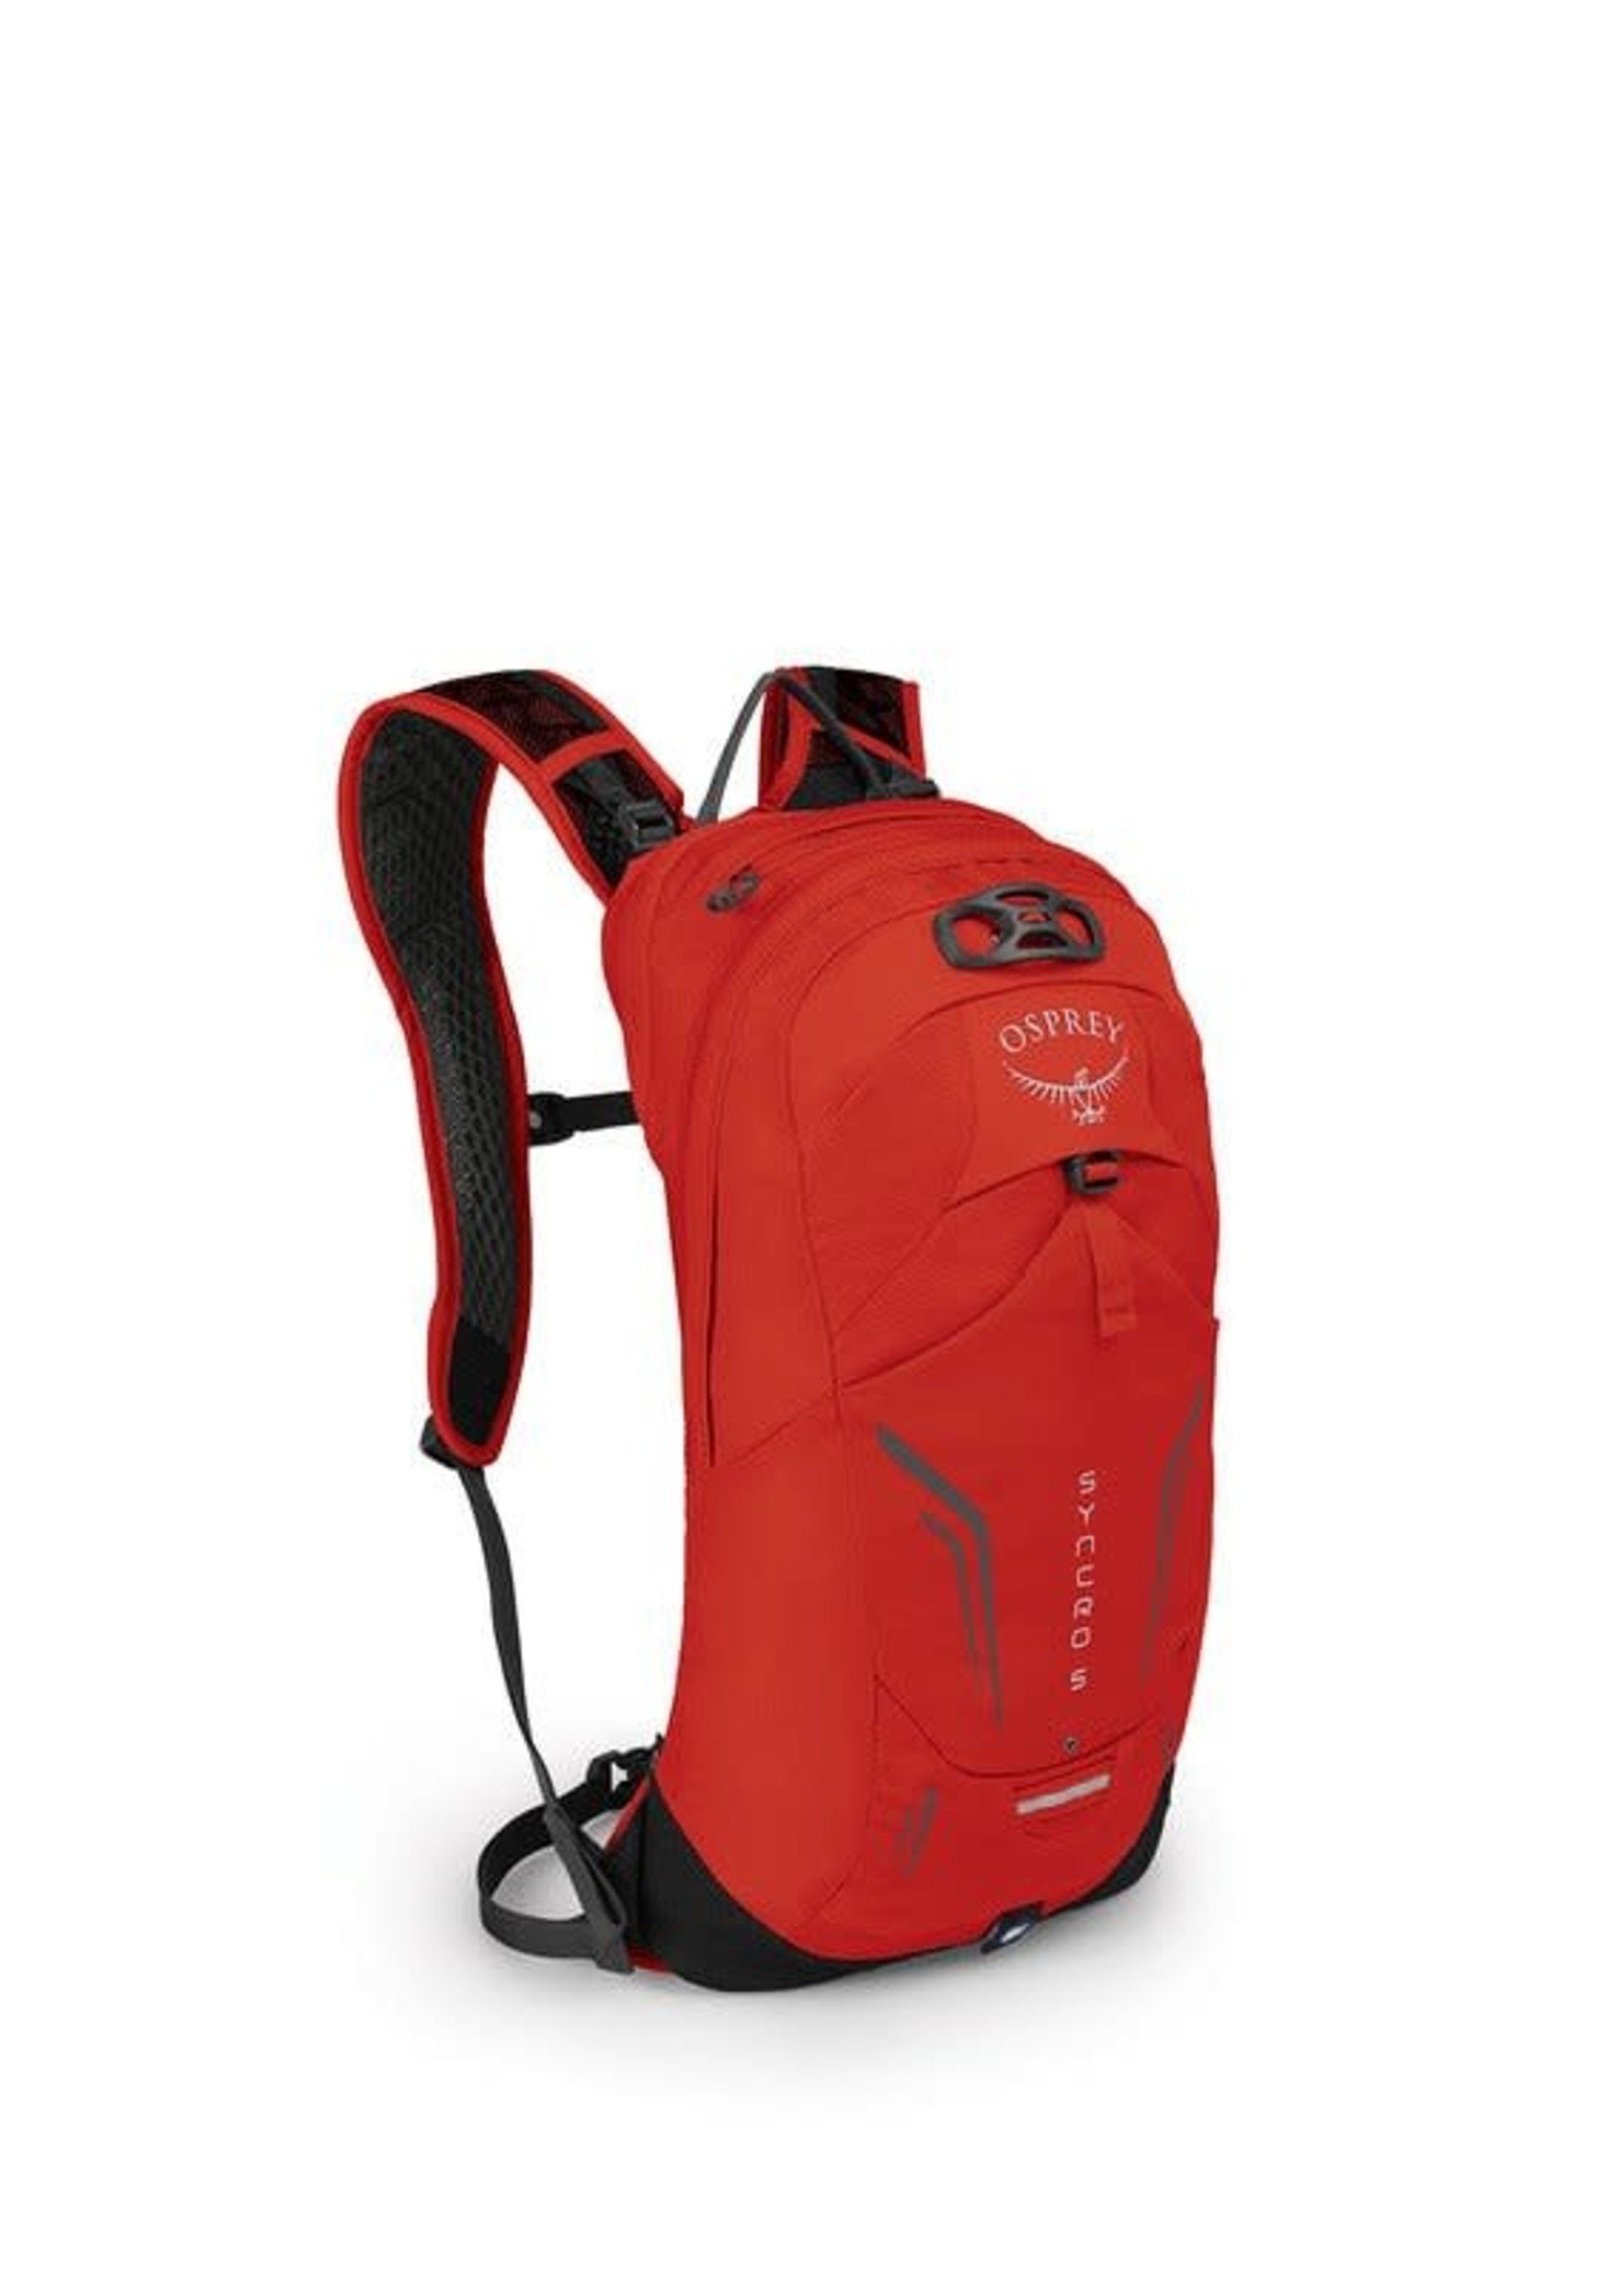 Osprey Syncro 5 with Reservoir